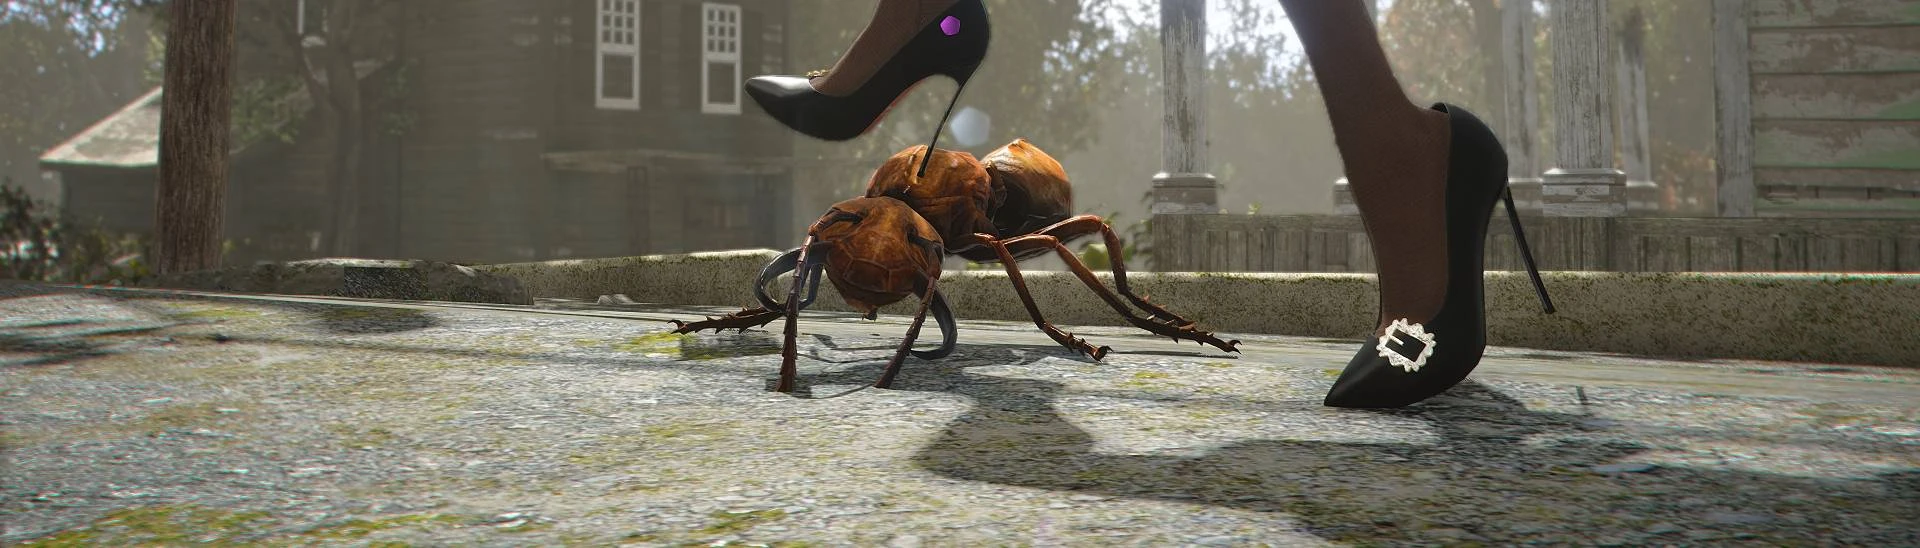 Fallout 4: Nuka-World Fallout: New Vegas Insect Fallout 3 Cave crickets,  insect, animals, fallout Wiki png